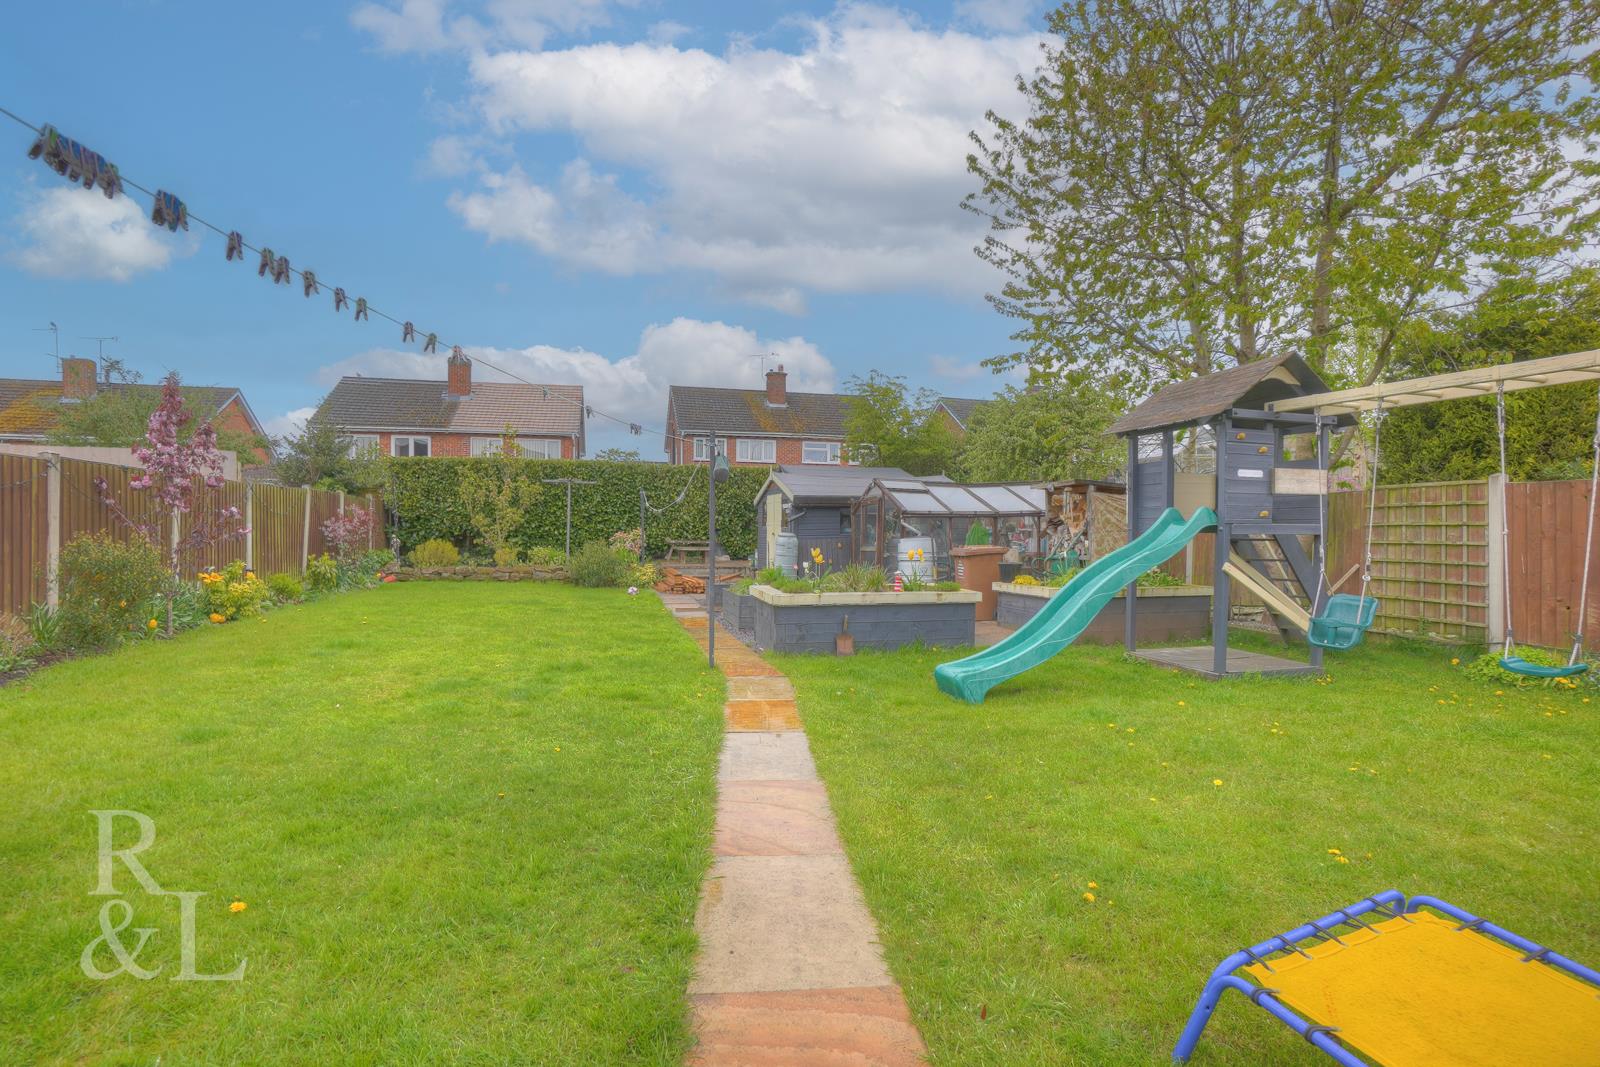 Property image for Westfield Road, Swadlincote